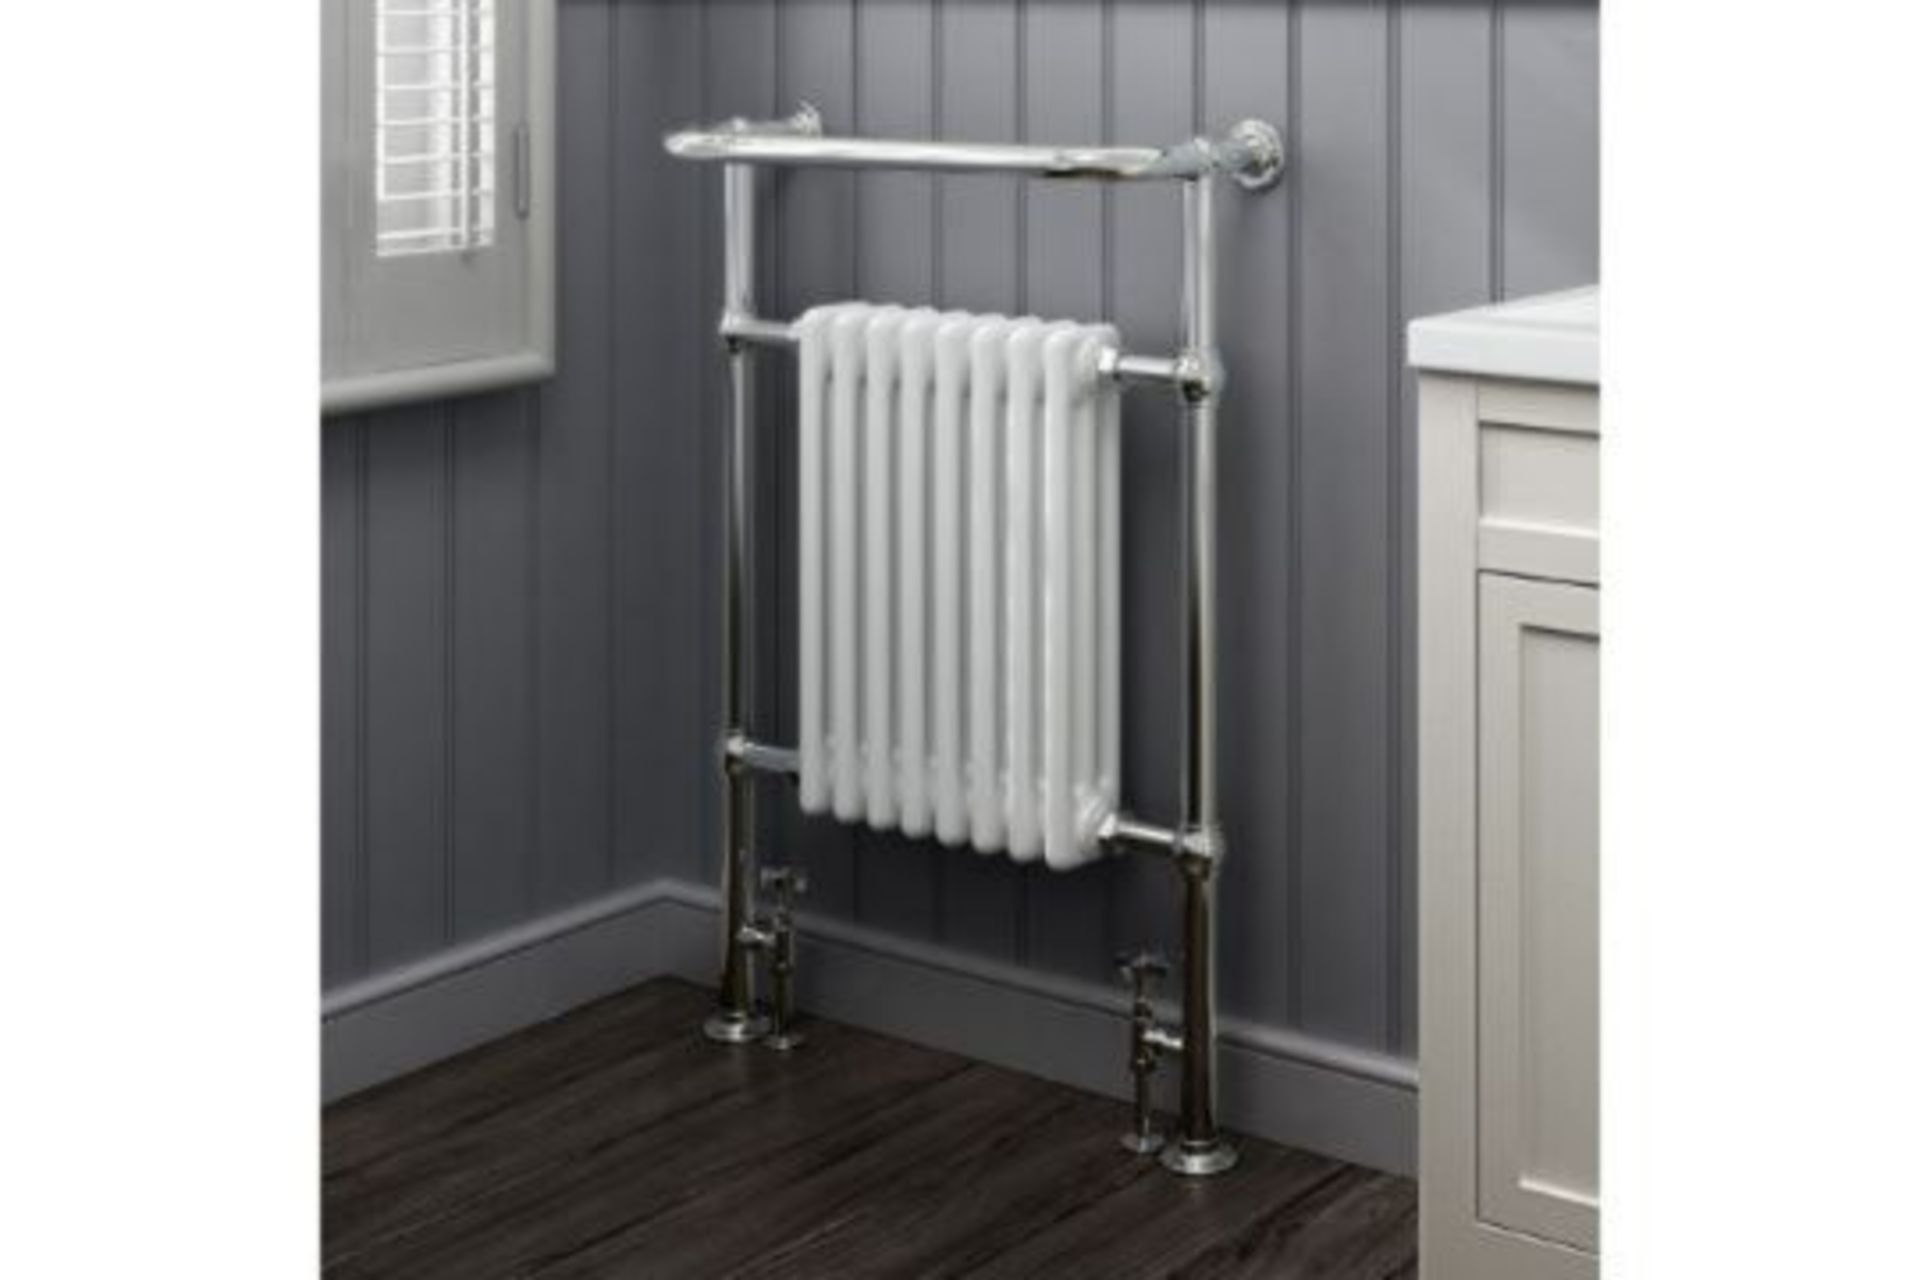 NEW NEW 952x659mm Large Traditional White Premium Towel Rail Radiator.RRP £499.99.We love this...